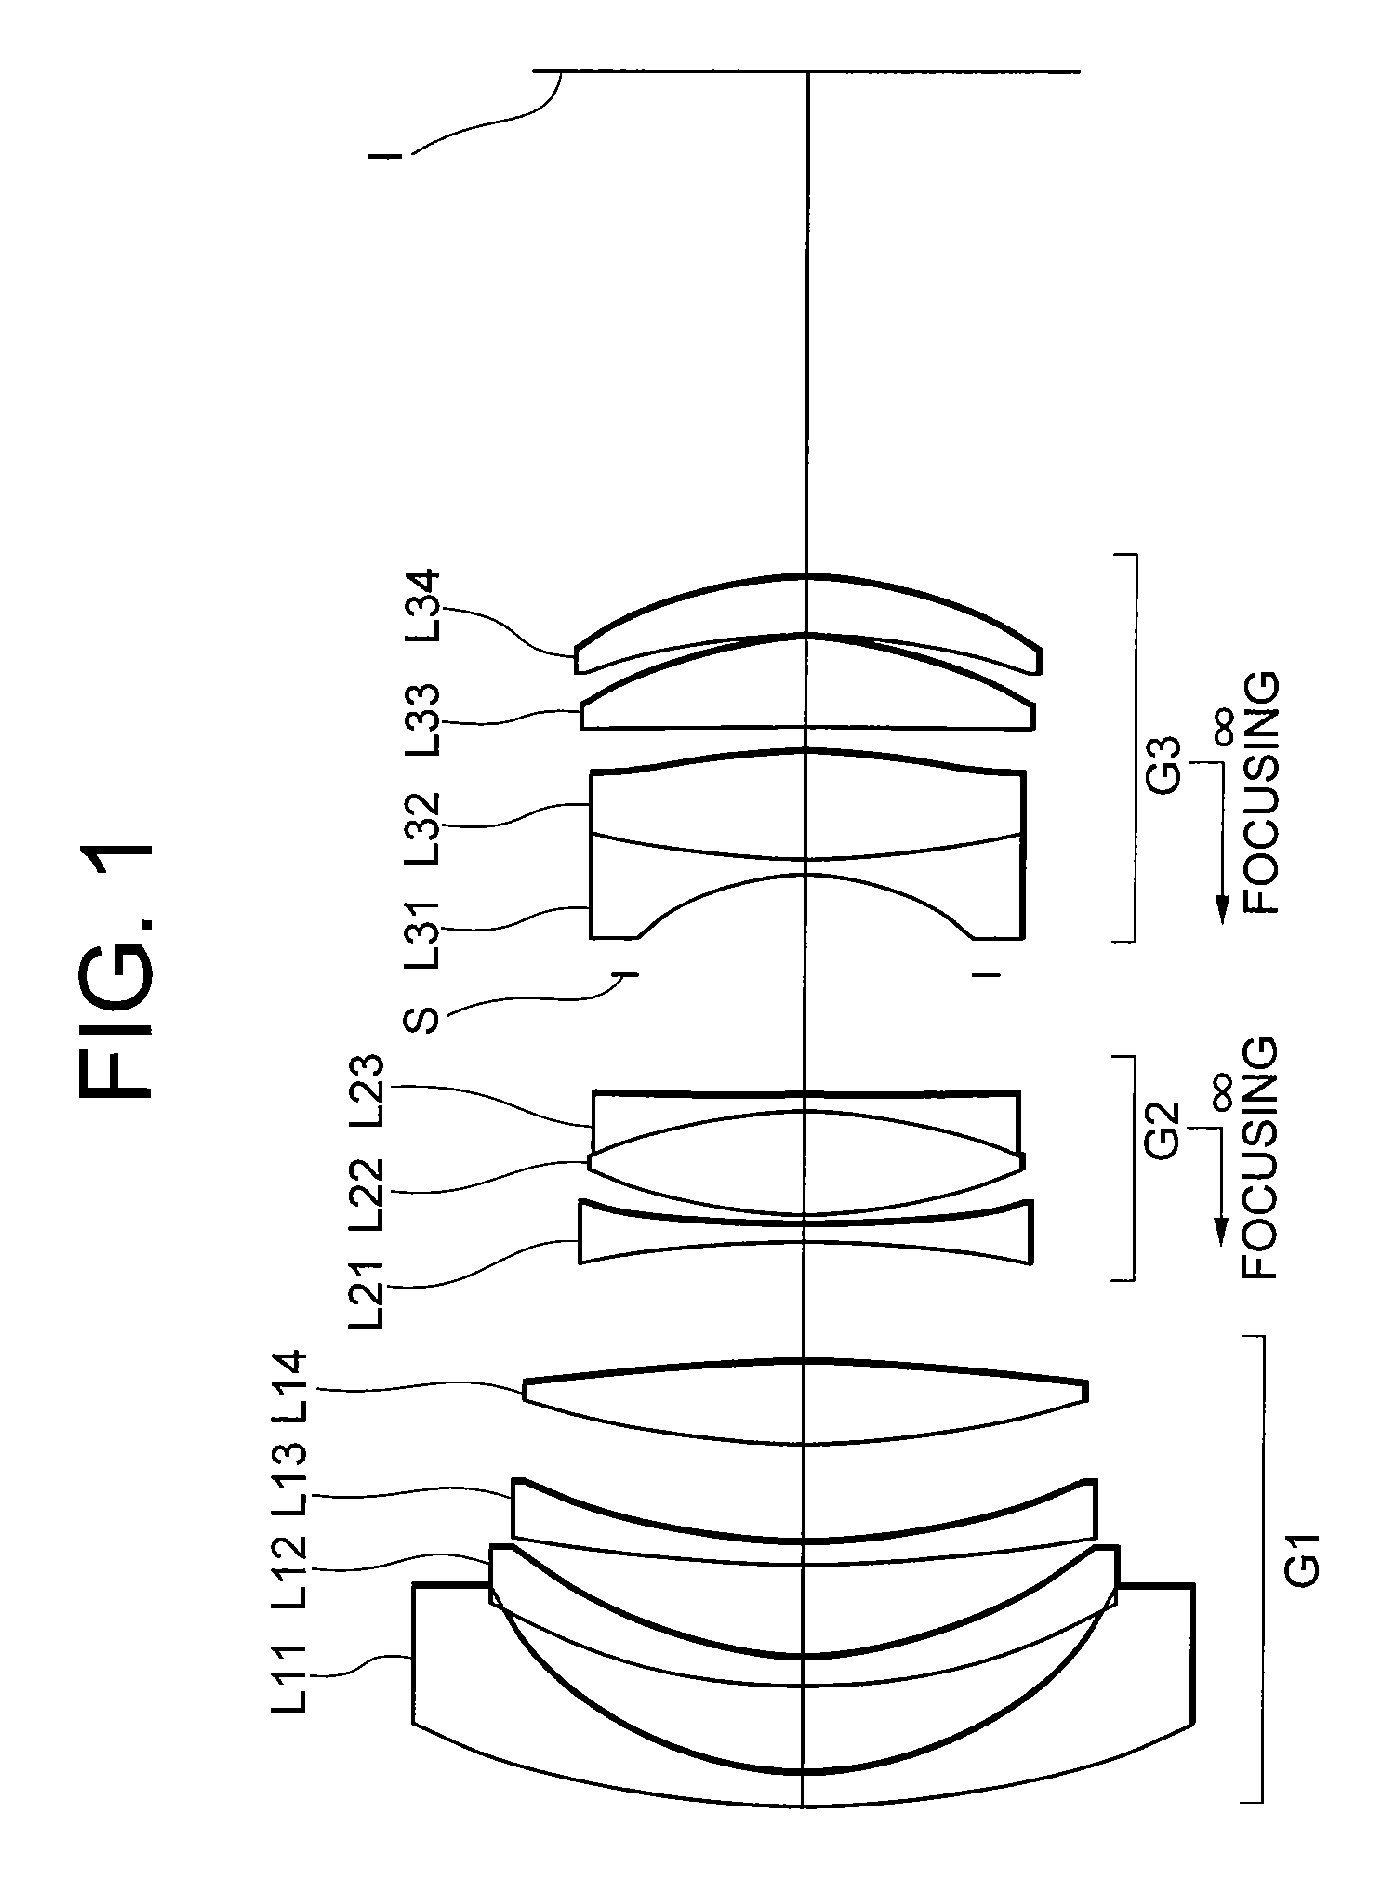 Wide-angle lens, optical apparatus, and method for focusing